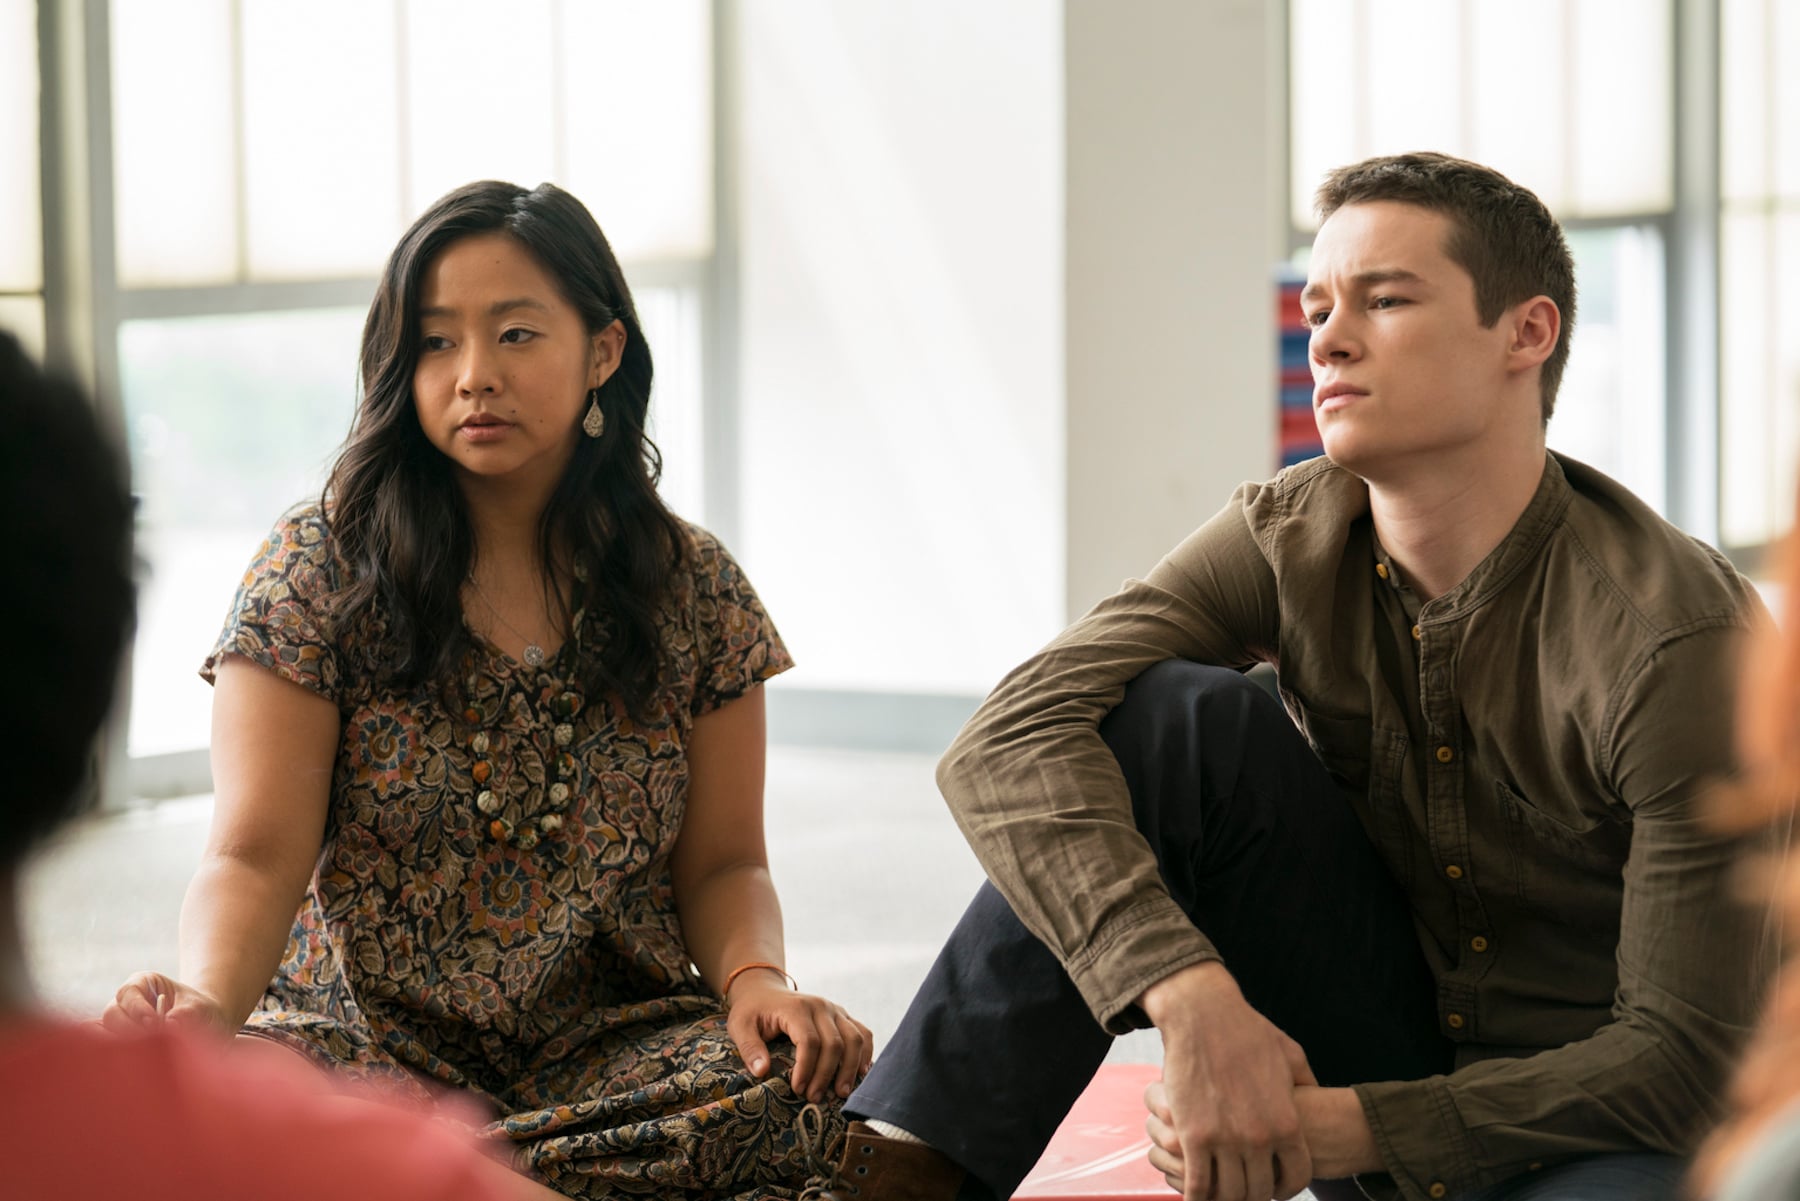 THE PATH, l-r: Stephanie Hsu, Kyle Allen in 'Locusts' (Season 3, Episode 3, aired January 17, 2018). ph: Patrick Harbron/ Hulu/courtesy Everett Collection